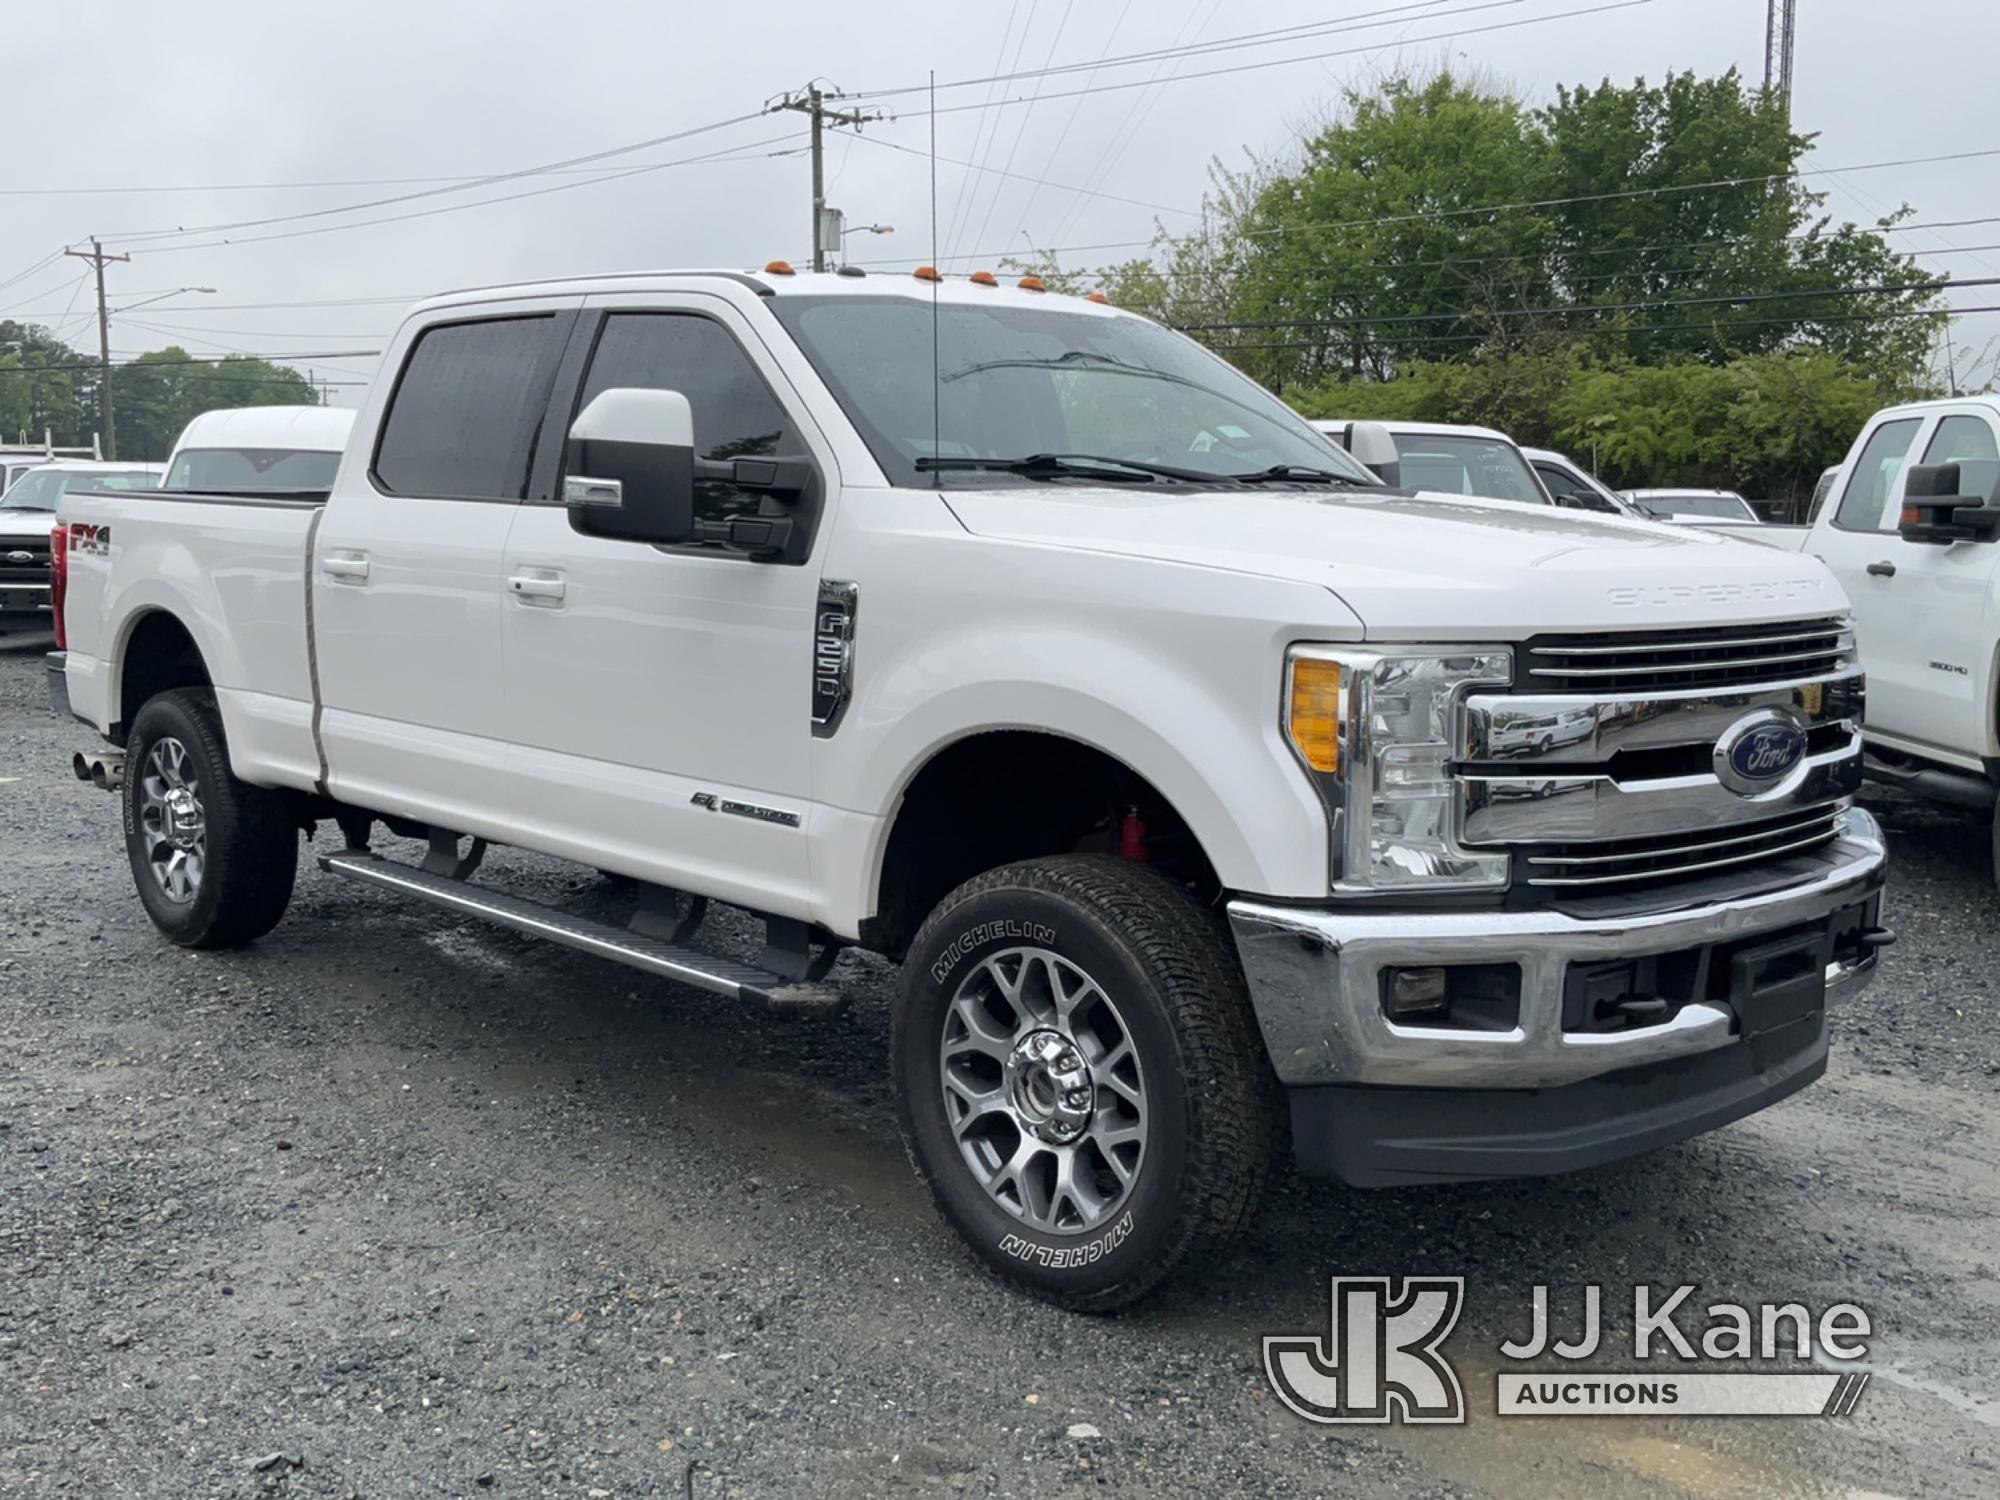 (Charlotte, NC) 2017 Ford F250 4x4 Crew-Cab Pickup Truck Runs & Moves) (Seller States: Intermittent